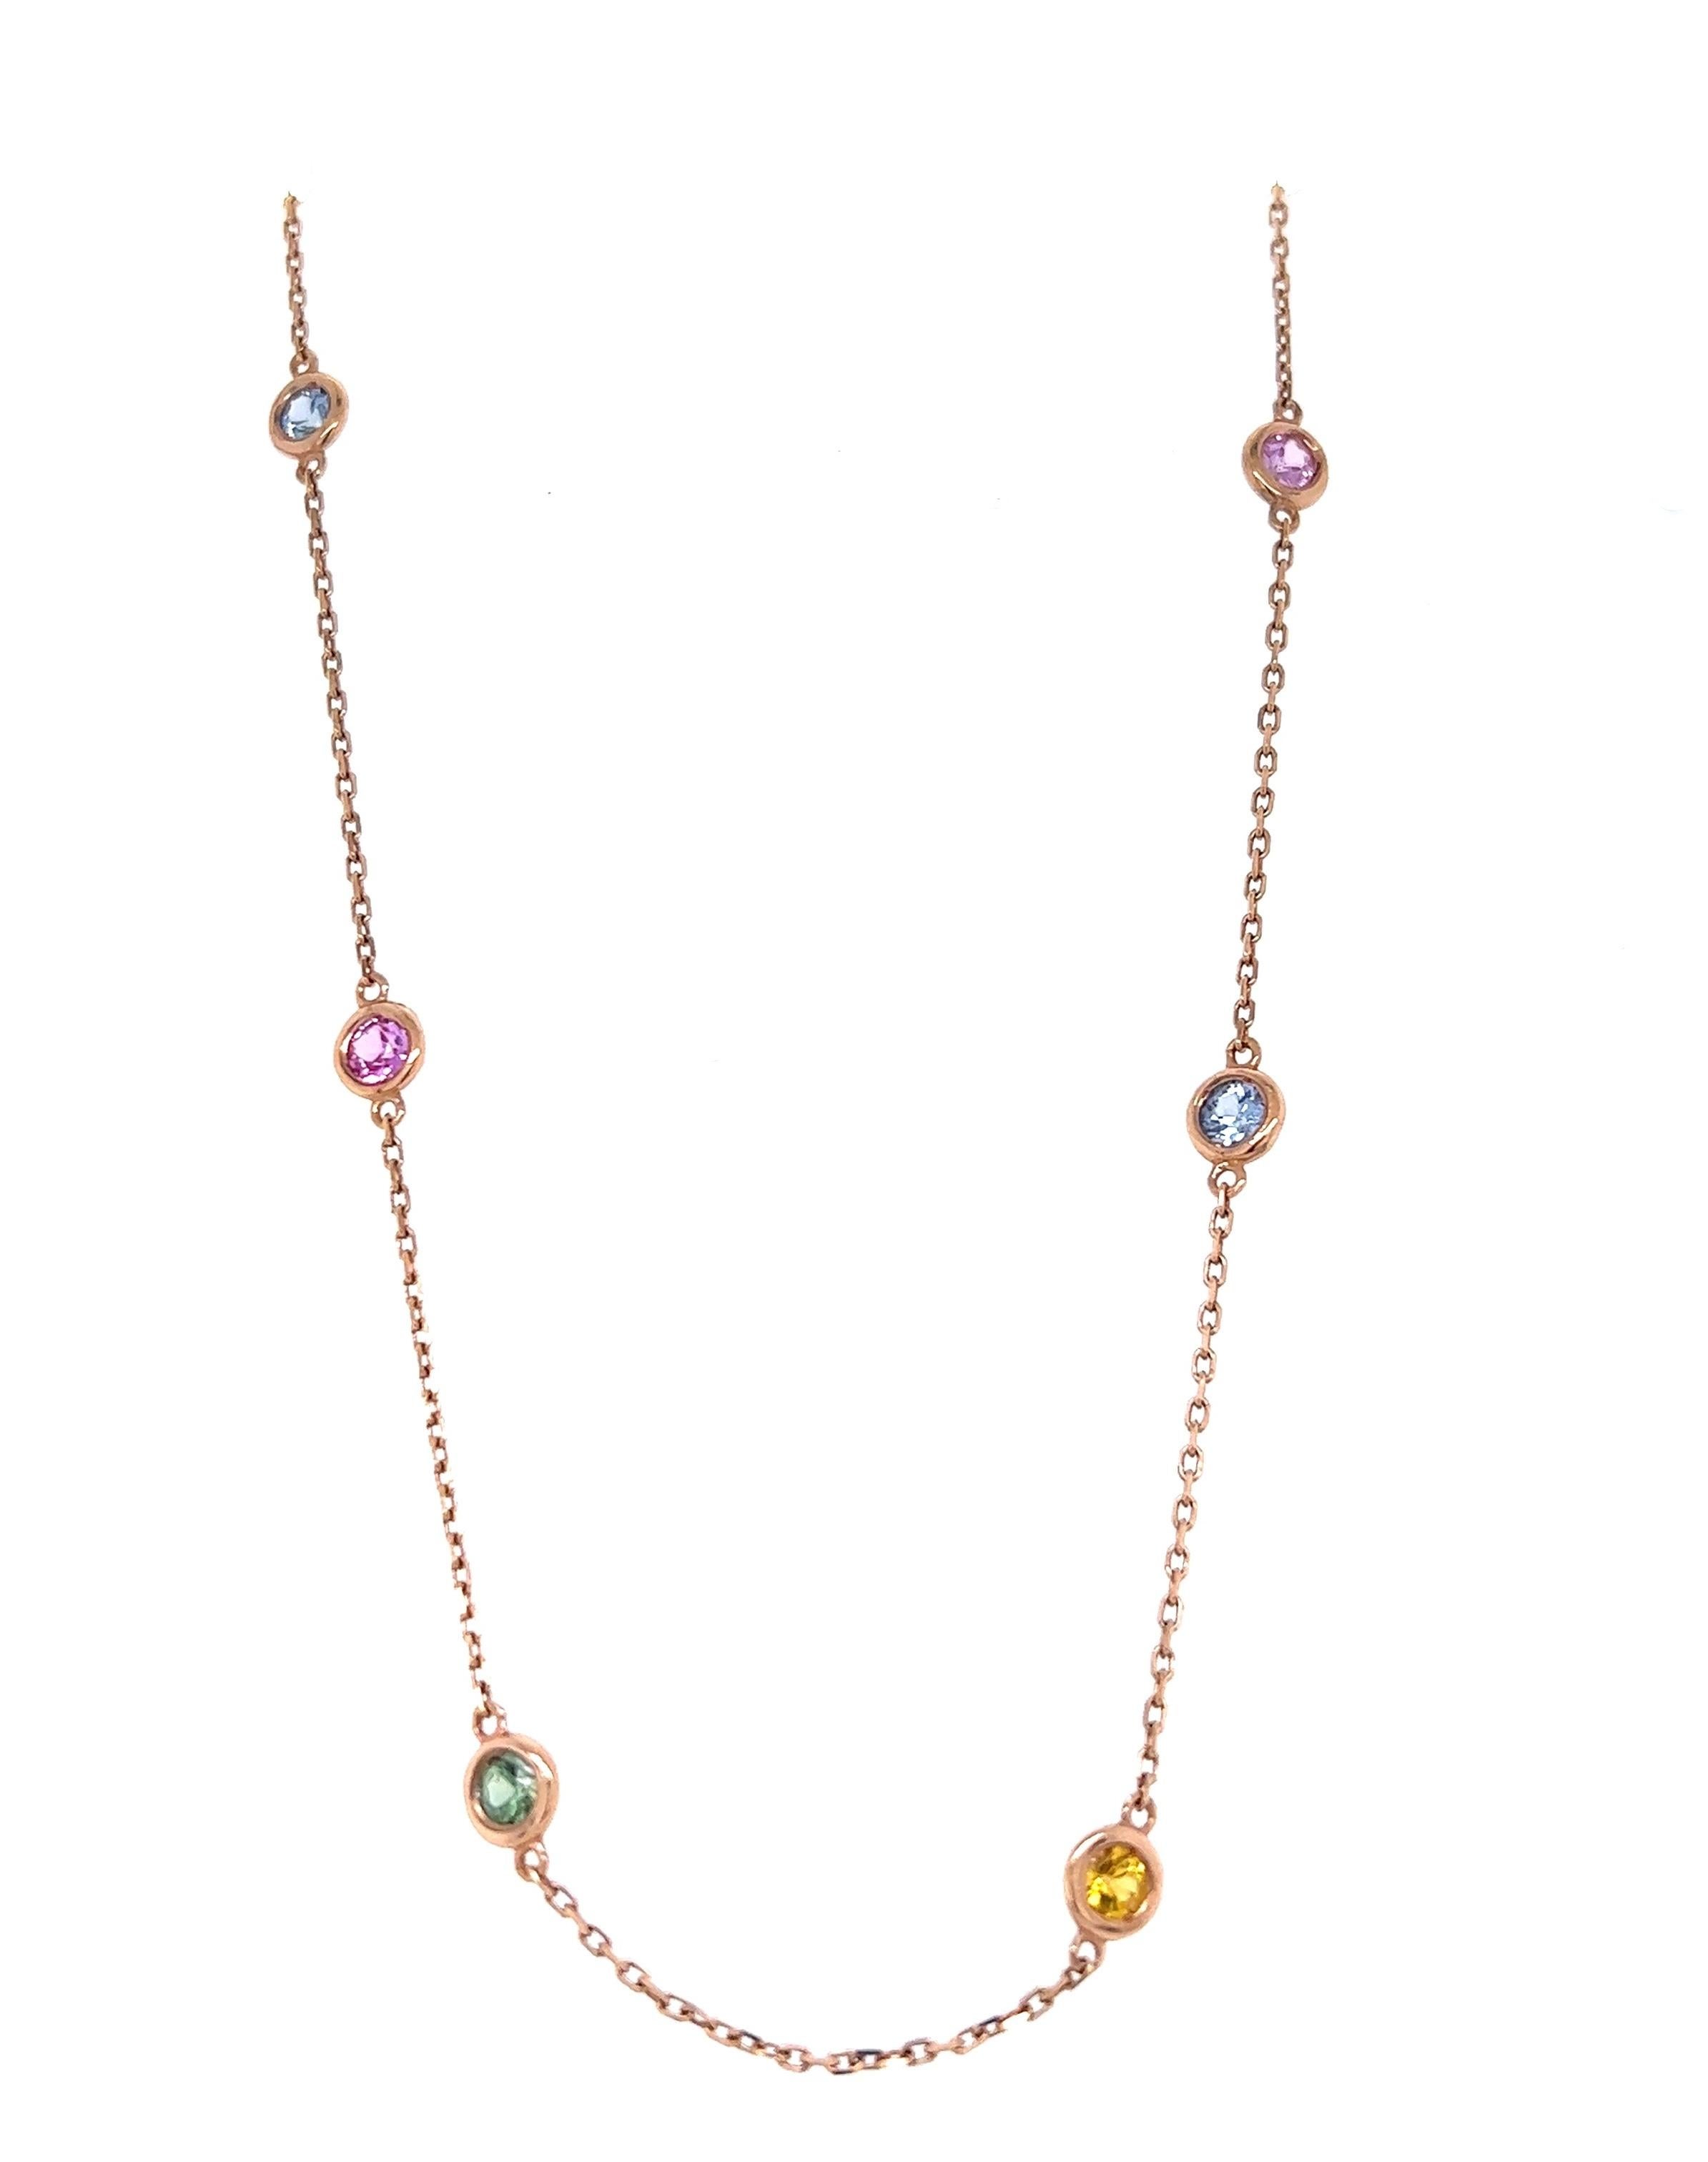 This necklace has 12 Multi Color Natural Sapphires that weigh 2.21 carats. They are Round Cut Sapphires and approximately measure at 3.5 mm in each bezel. 

Curated in 14 Karat Rose Gold and has an approximate weight of 4.8 grams

The length of the